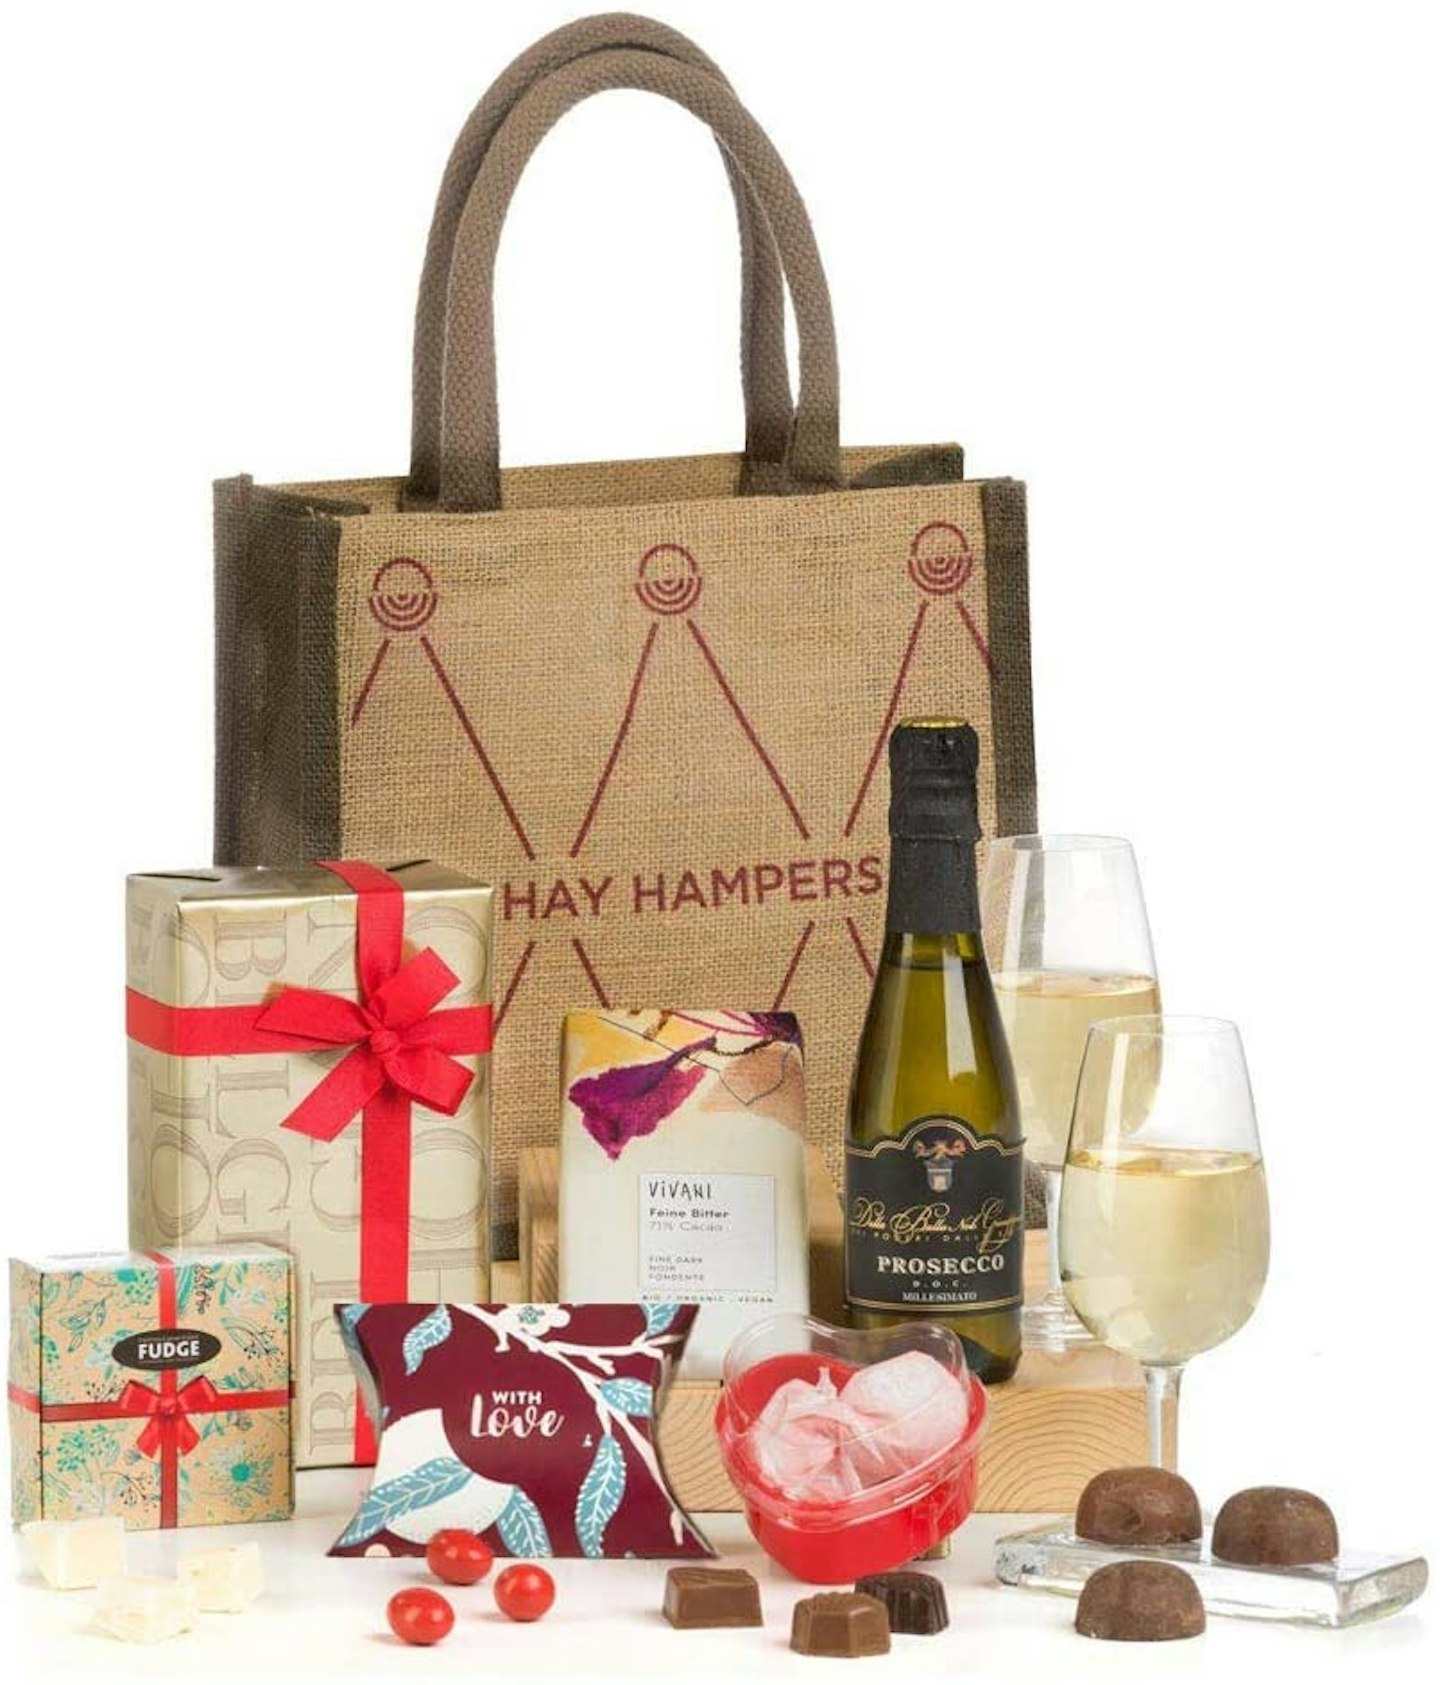 Hay Hampers -Prosecco Made Me Do It!